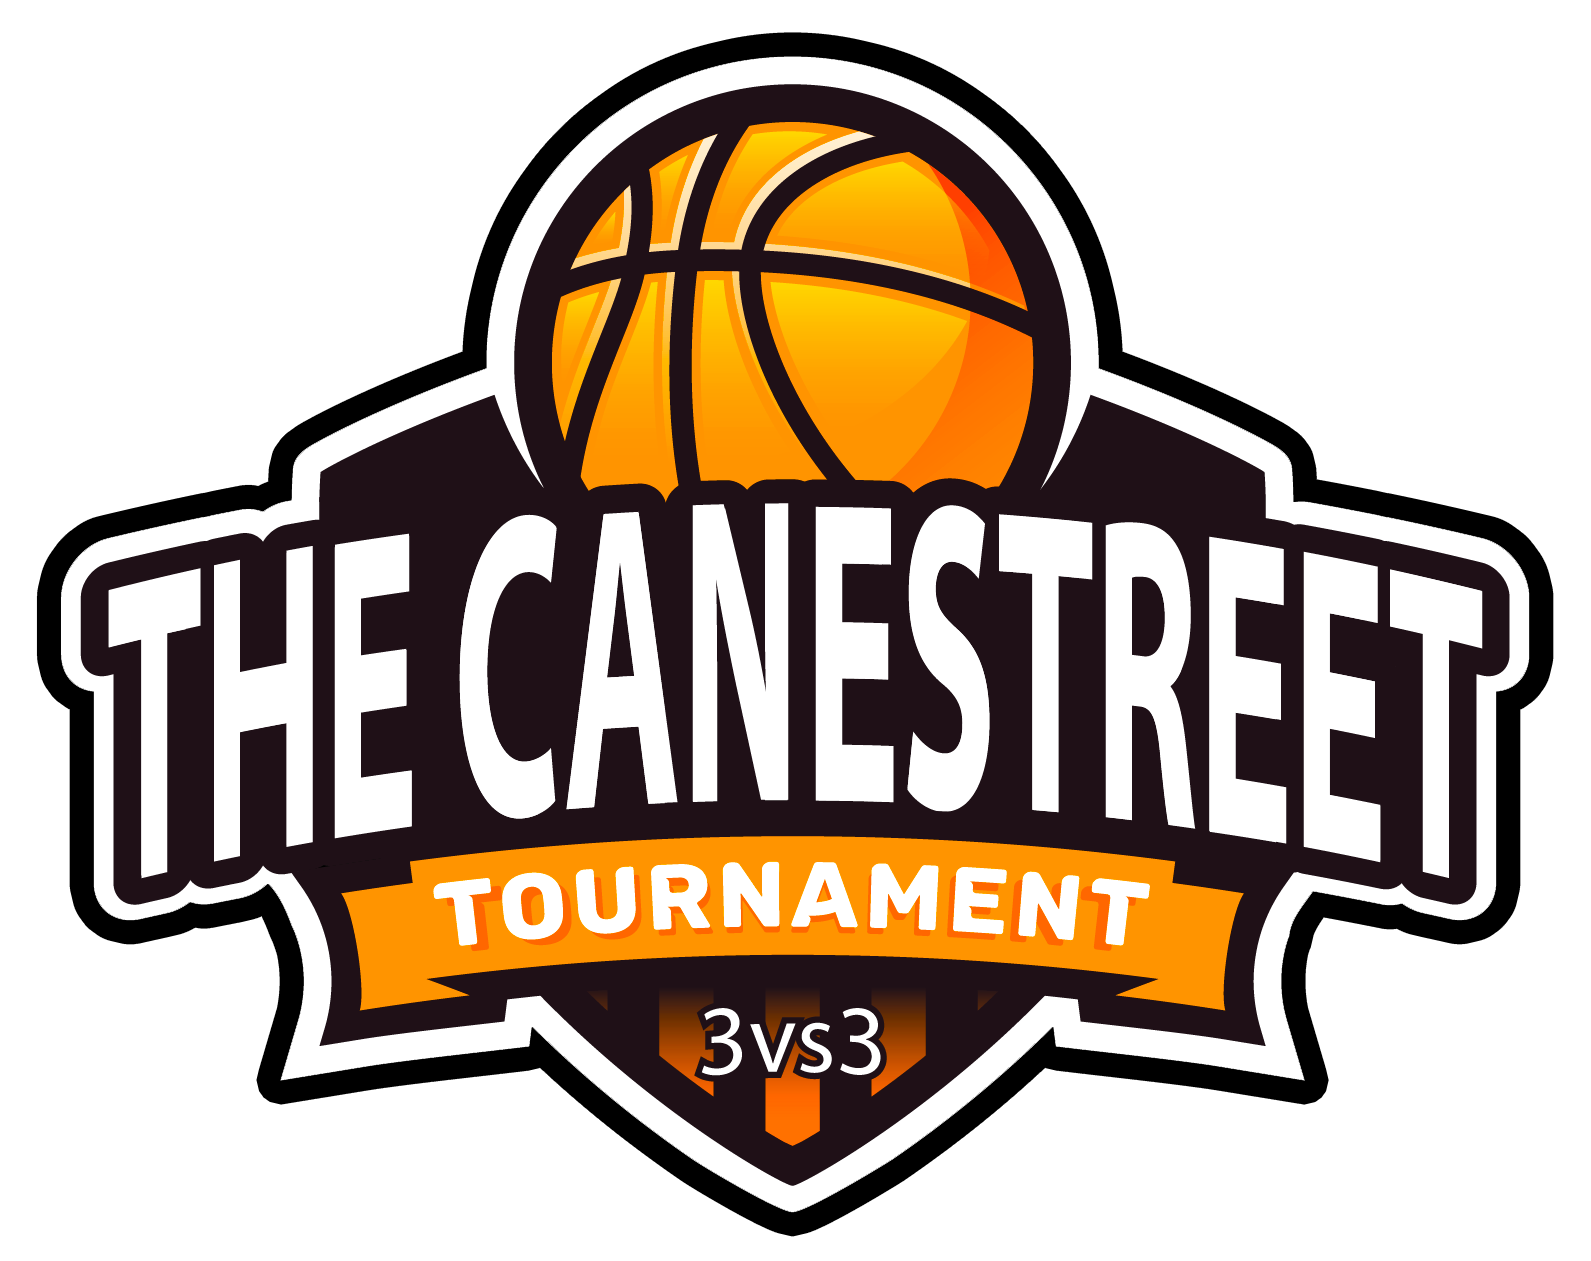 The Canestreet